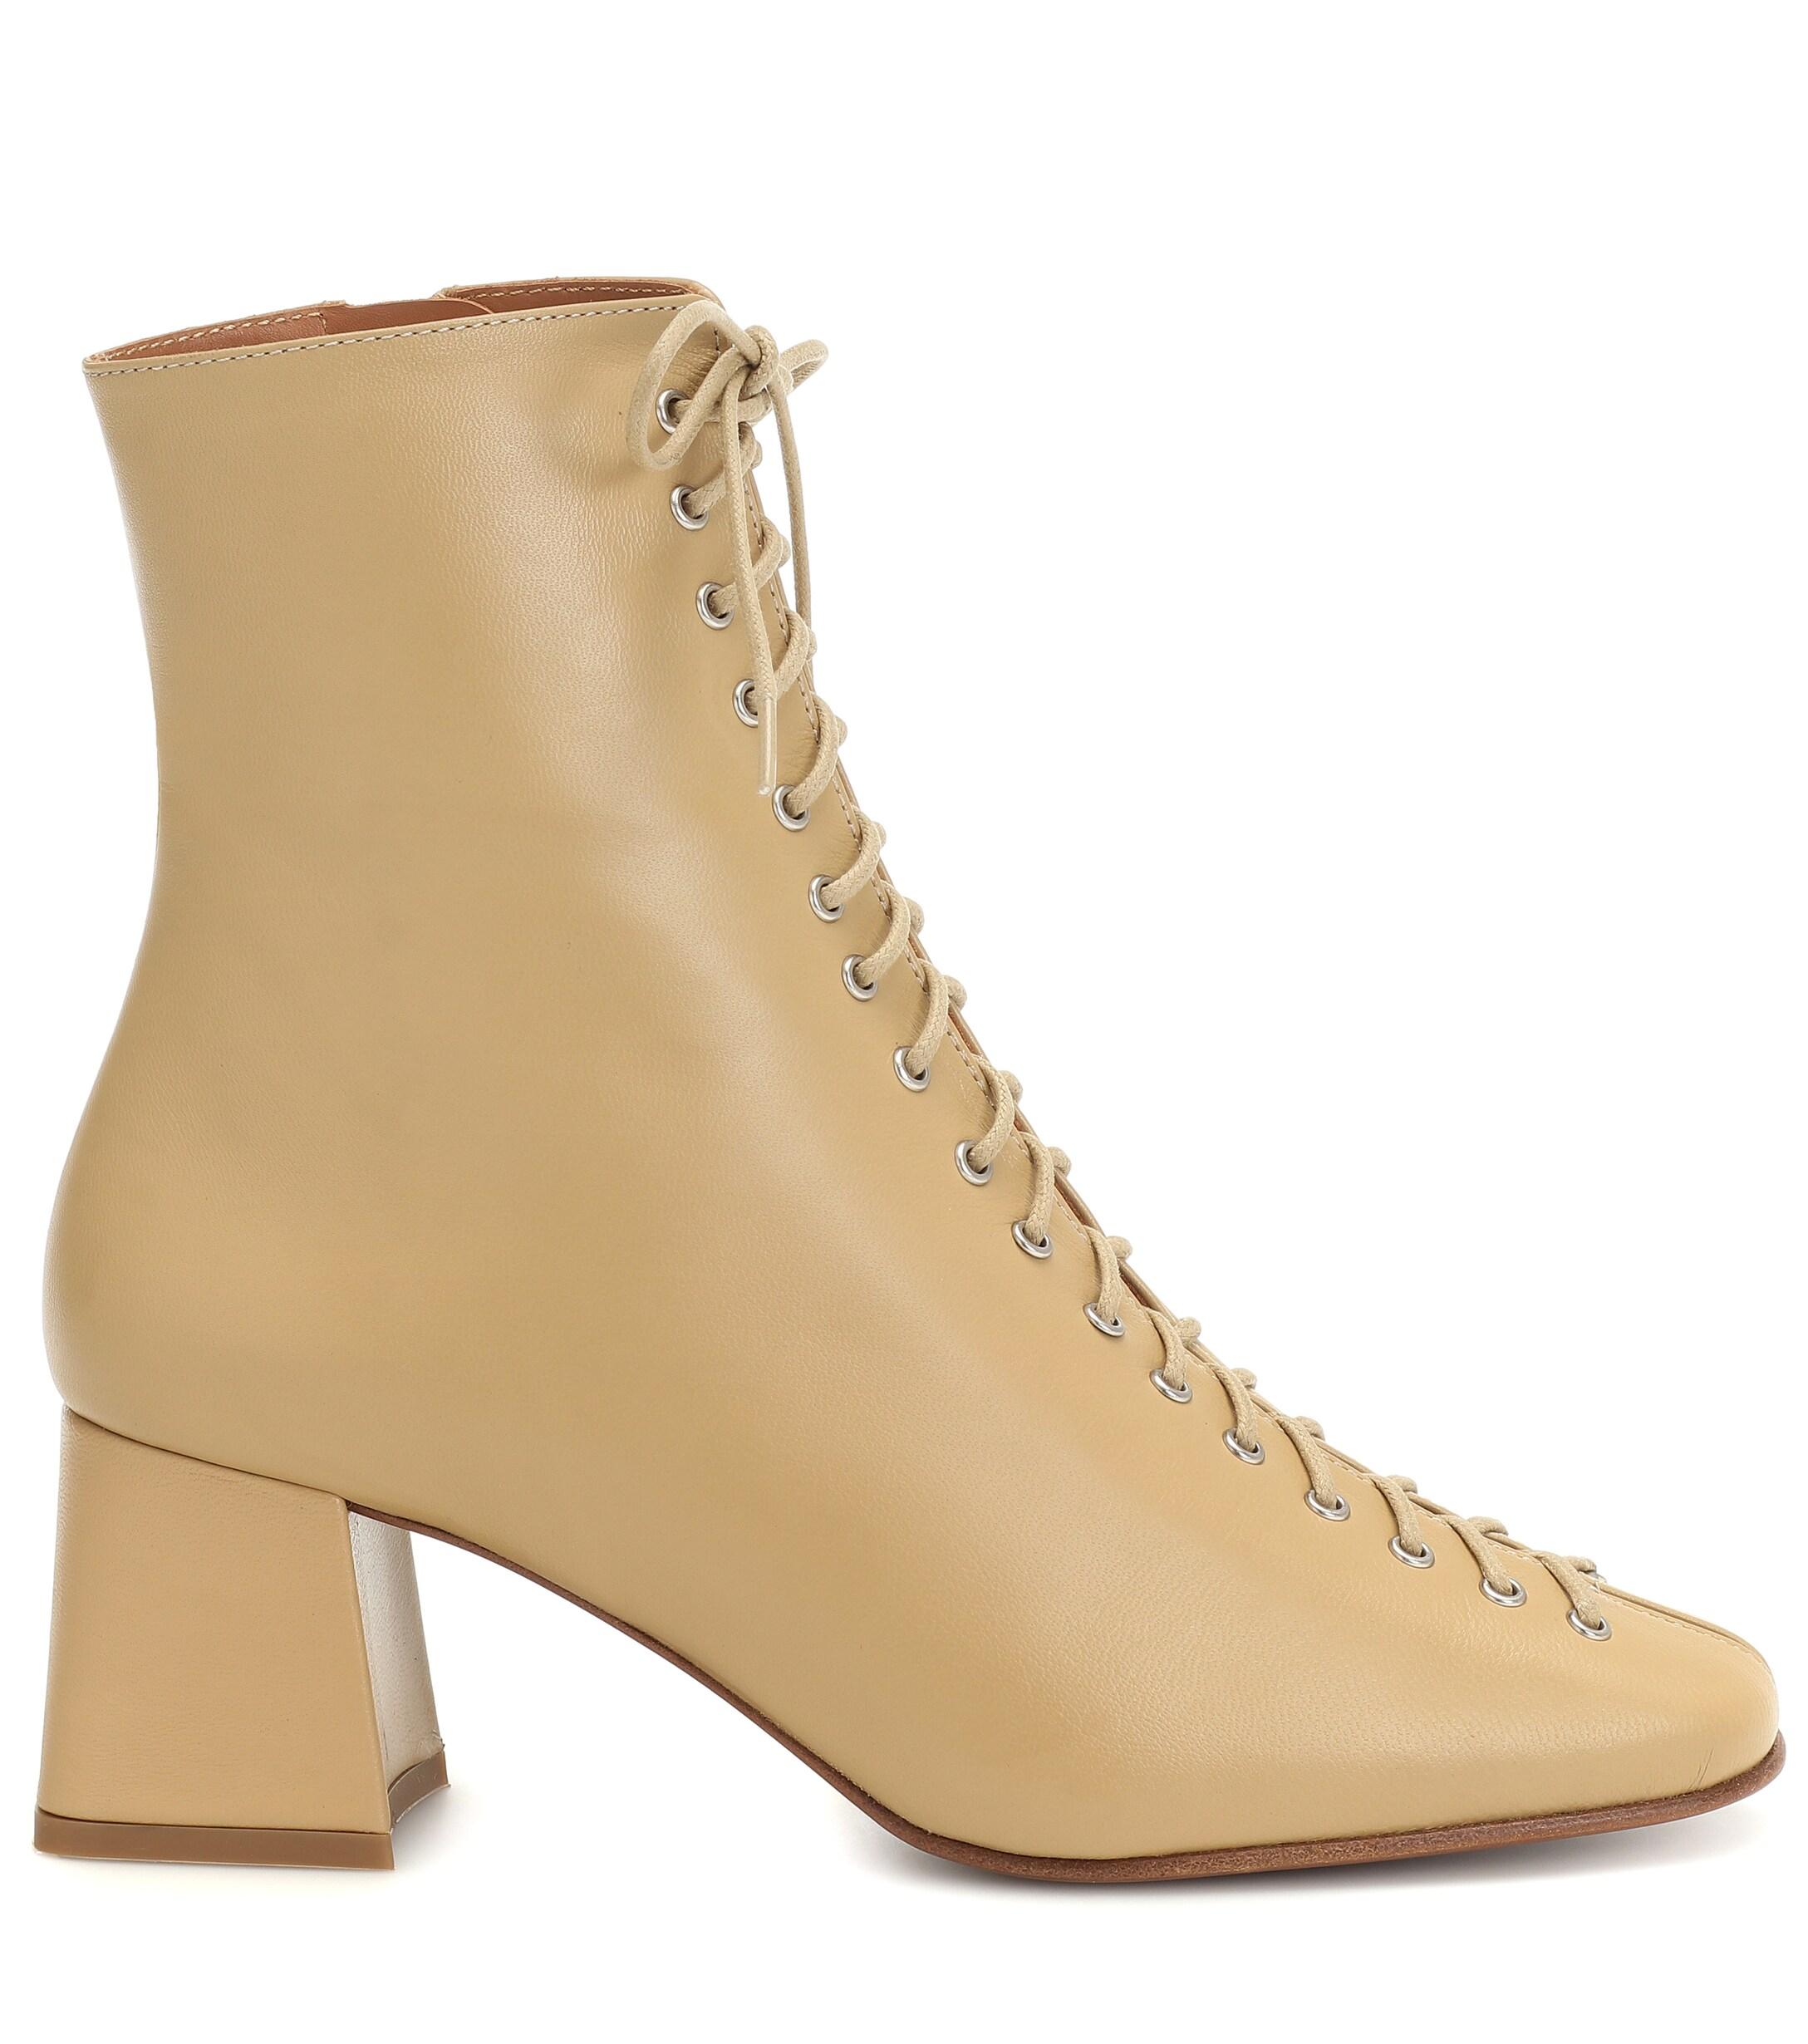 BY FAR Becca Leather Ankle Boots in Beige (Natural) - Lyst